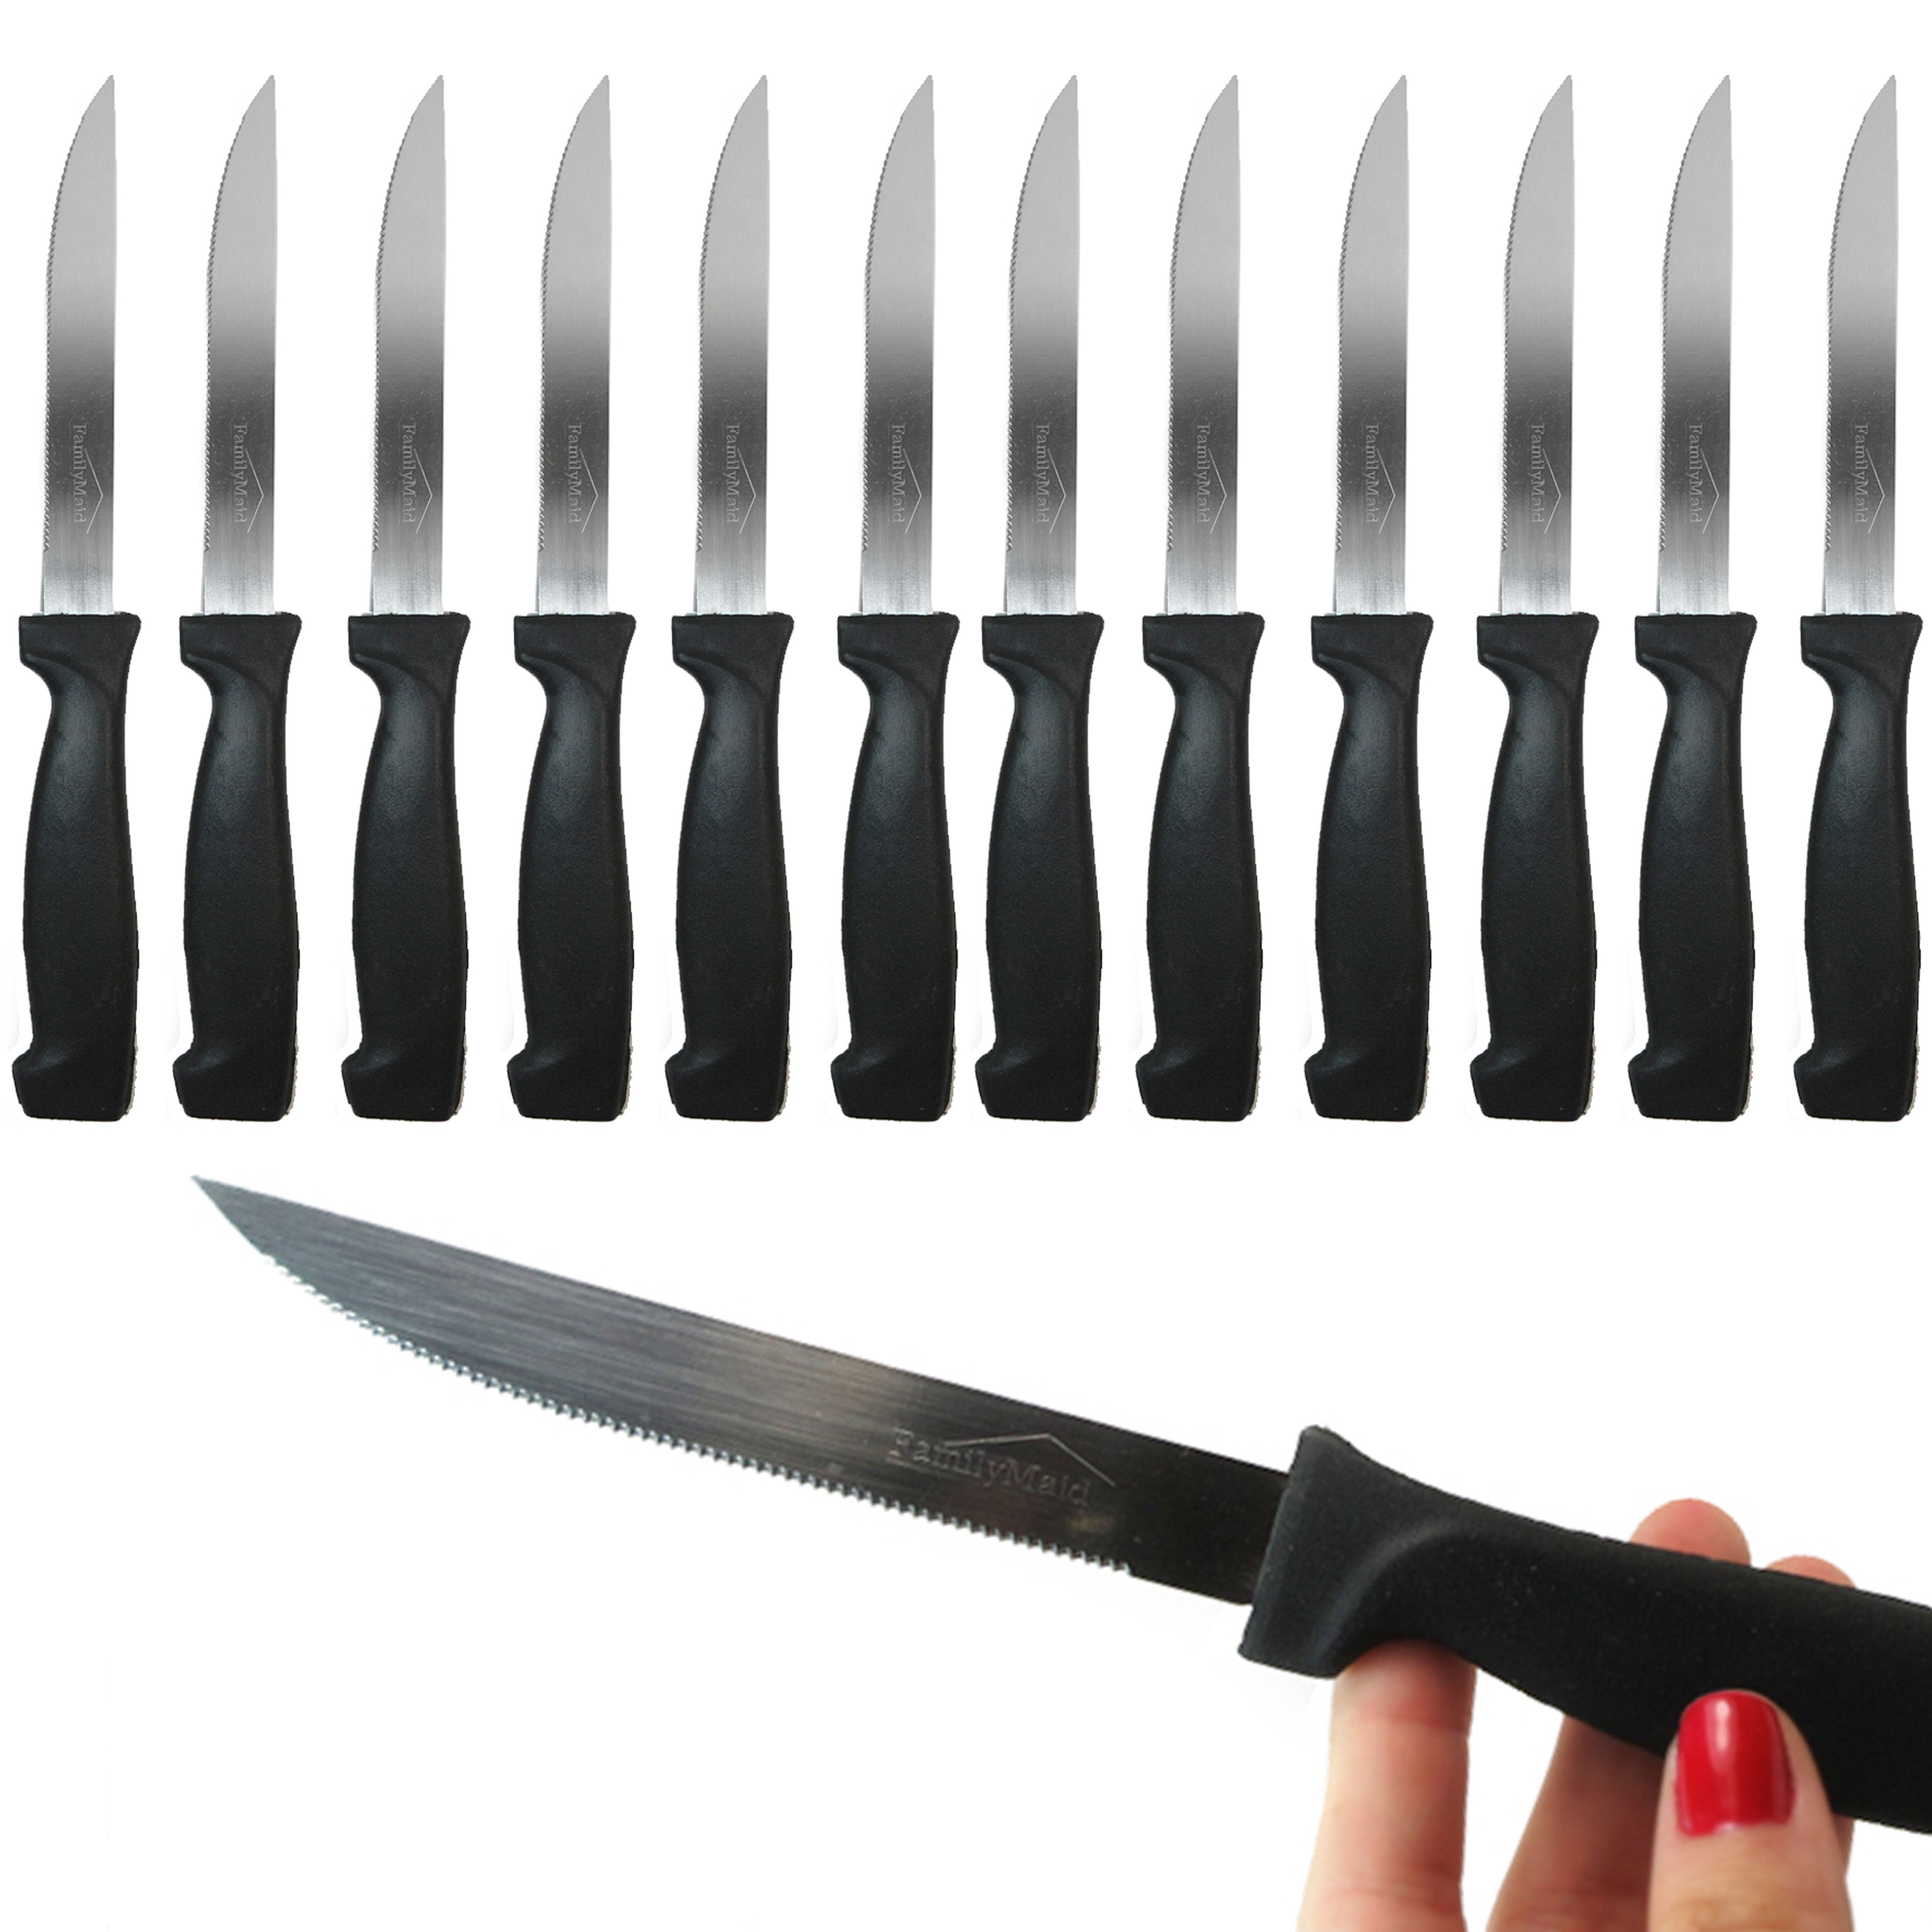 Tezzorio (Set of 12) Serrated-Edge Pointed-Tip Steak Knives, 5-Inch  Stainless Steel Blade Steak Knives with Plastic Handles for Restaurants